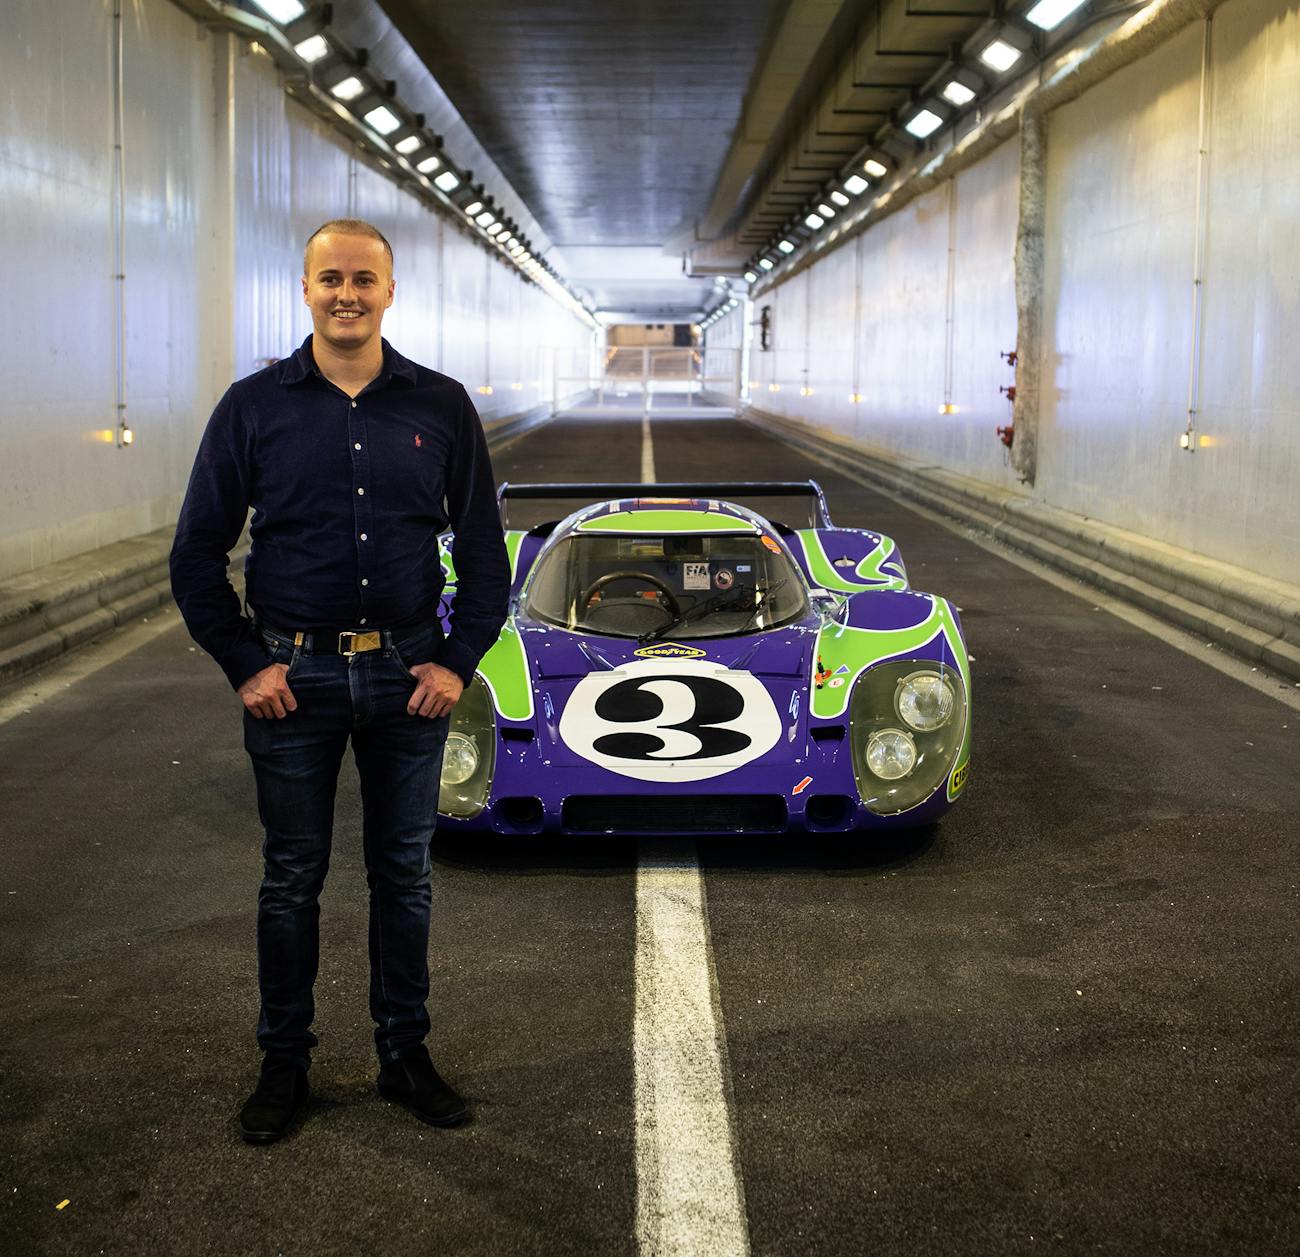 Man stands in tunnel with colourful Porsche 917 LH racecar